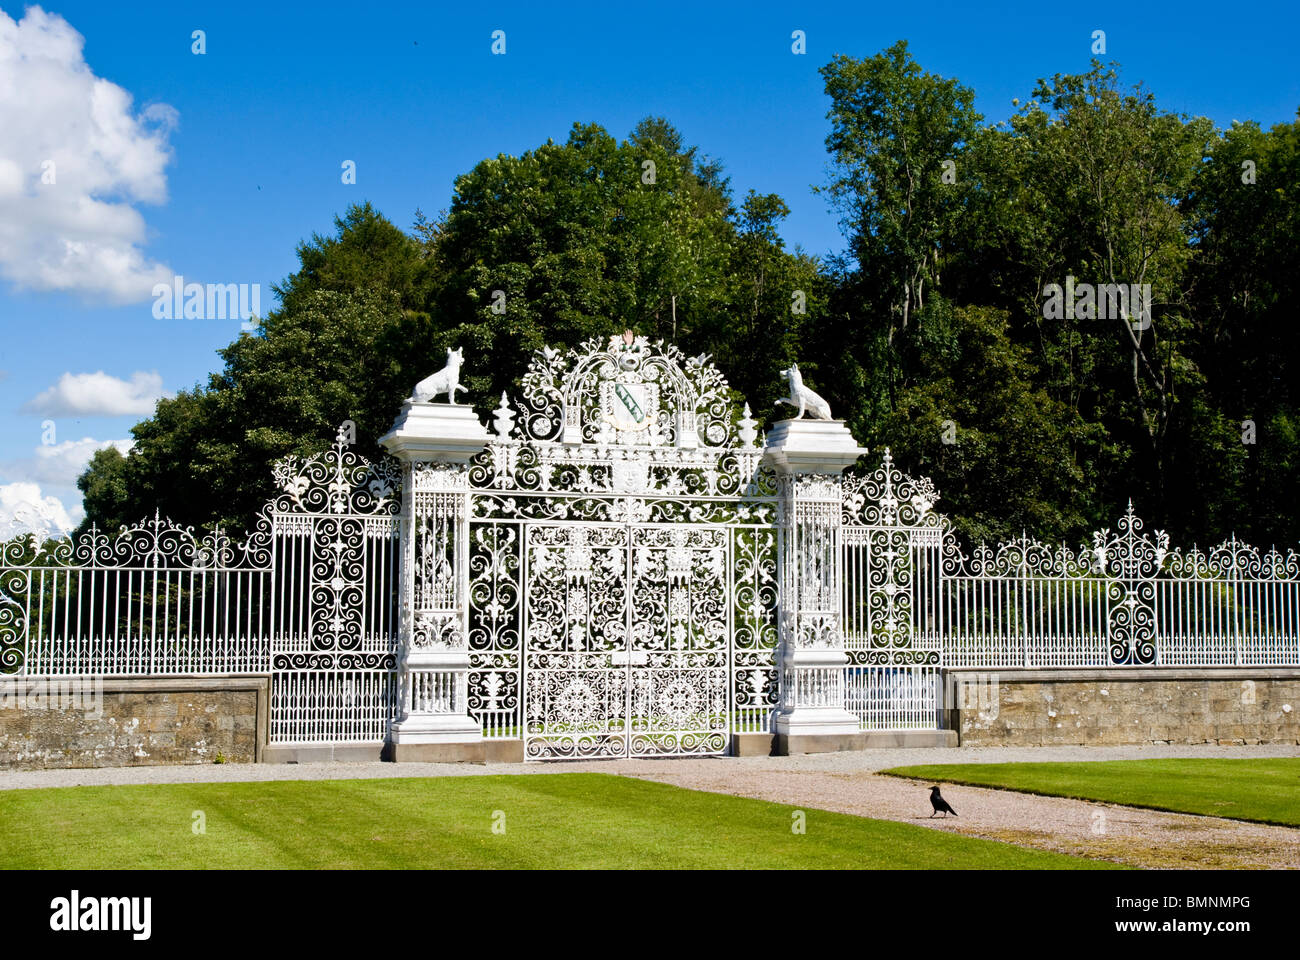 Europe, Uk, Wales, Clwyd, Chirk Castle Gate Stock Photo